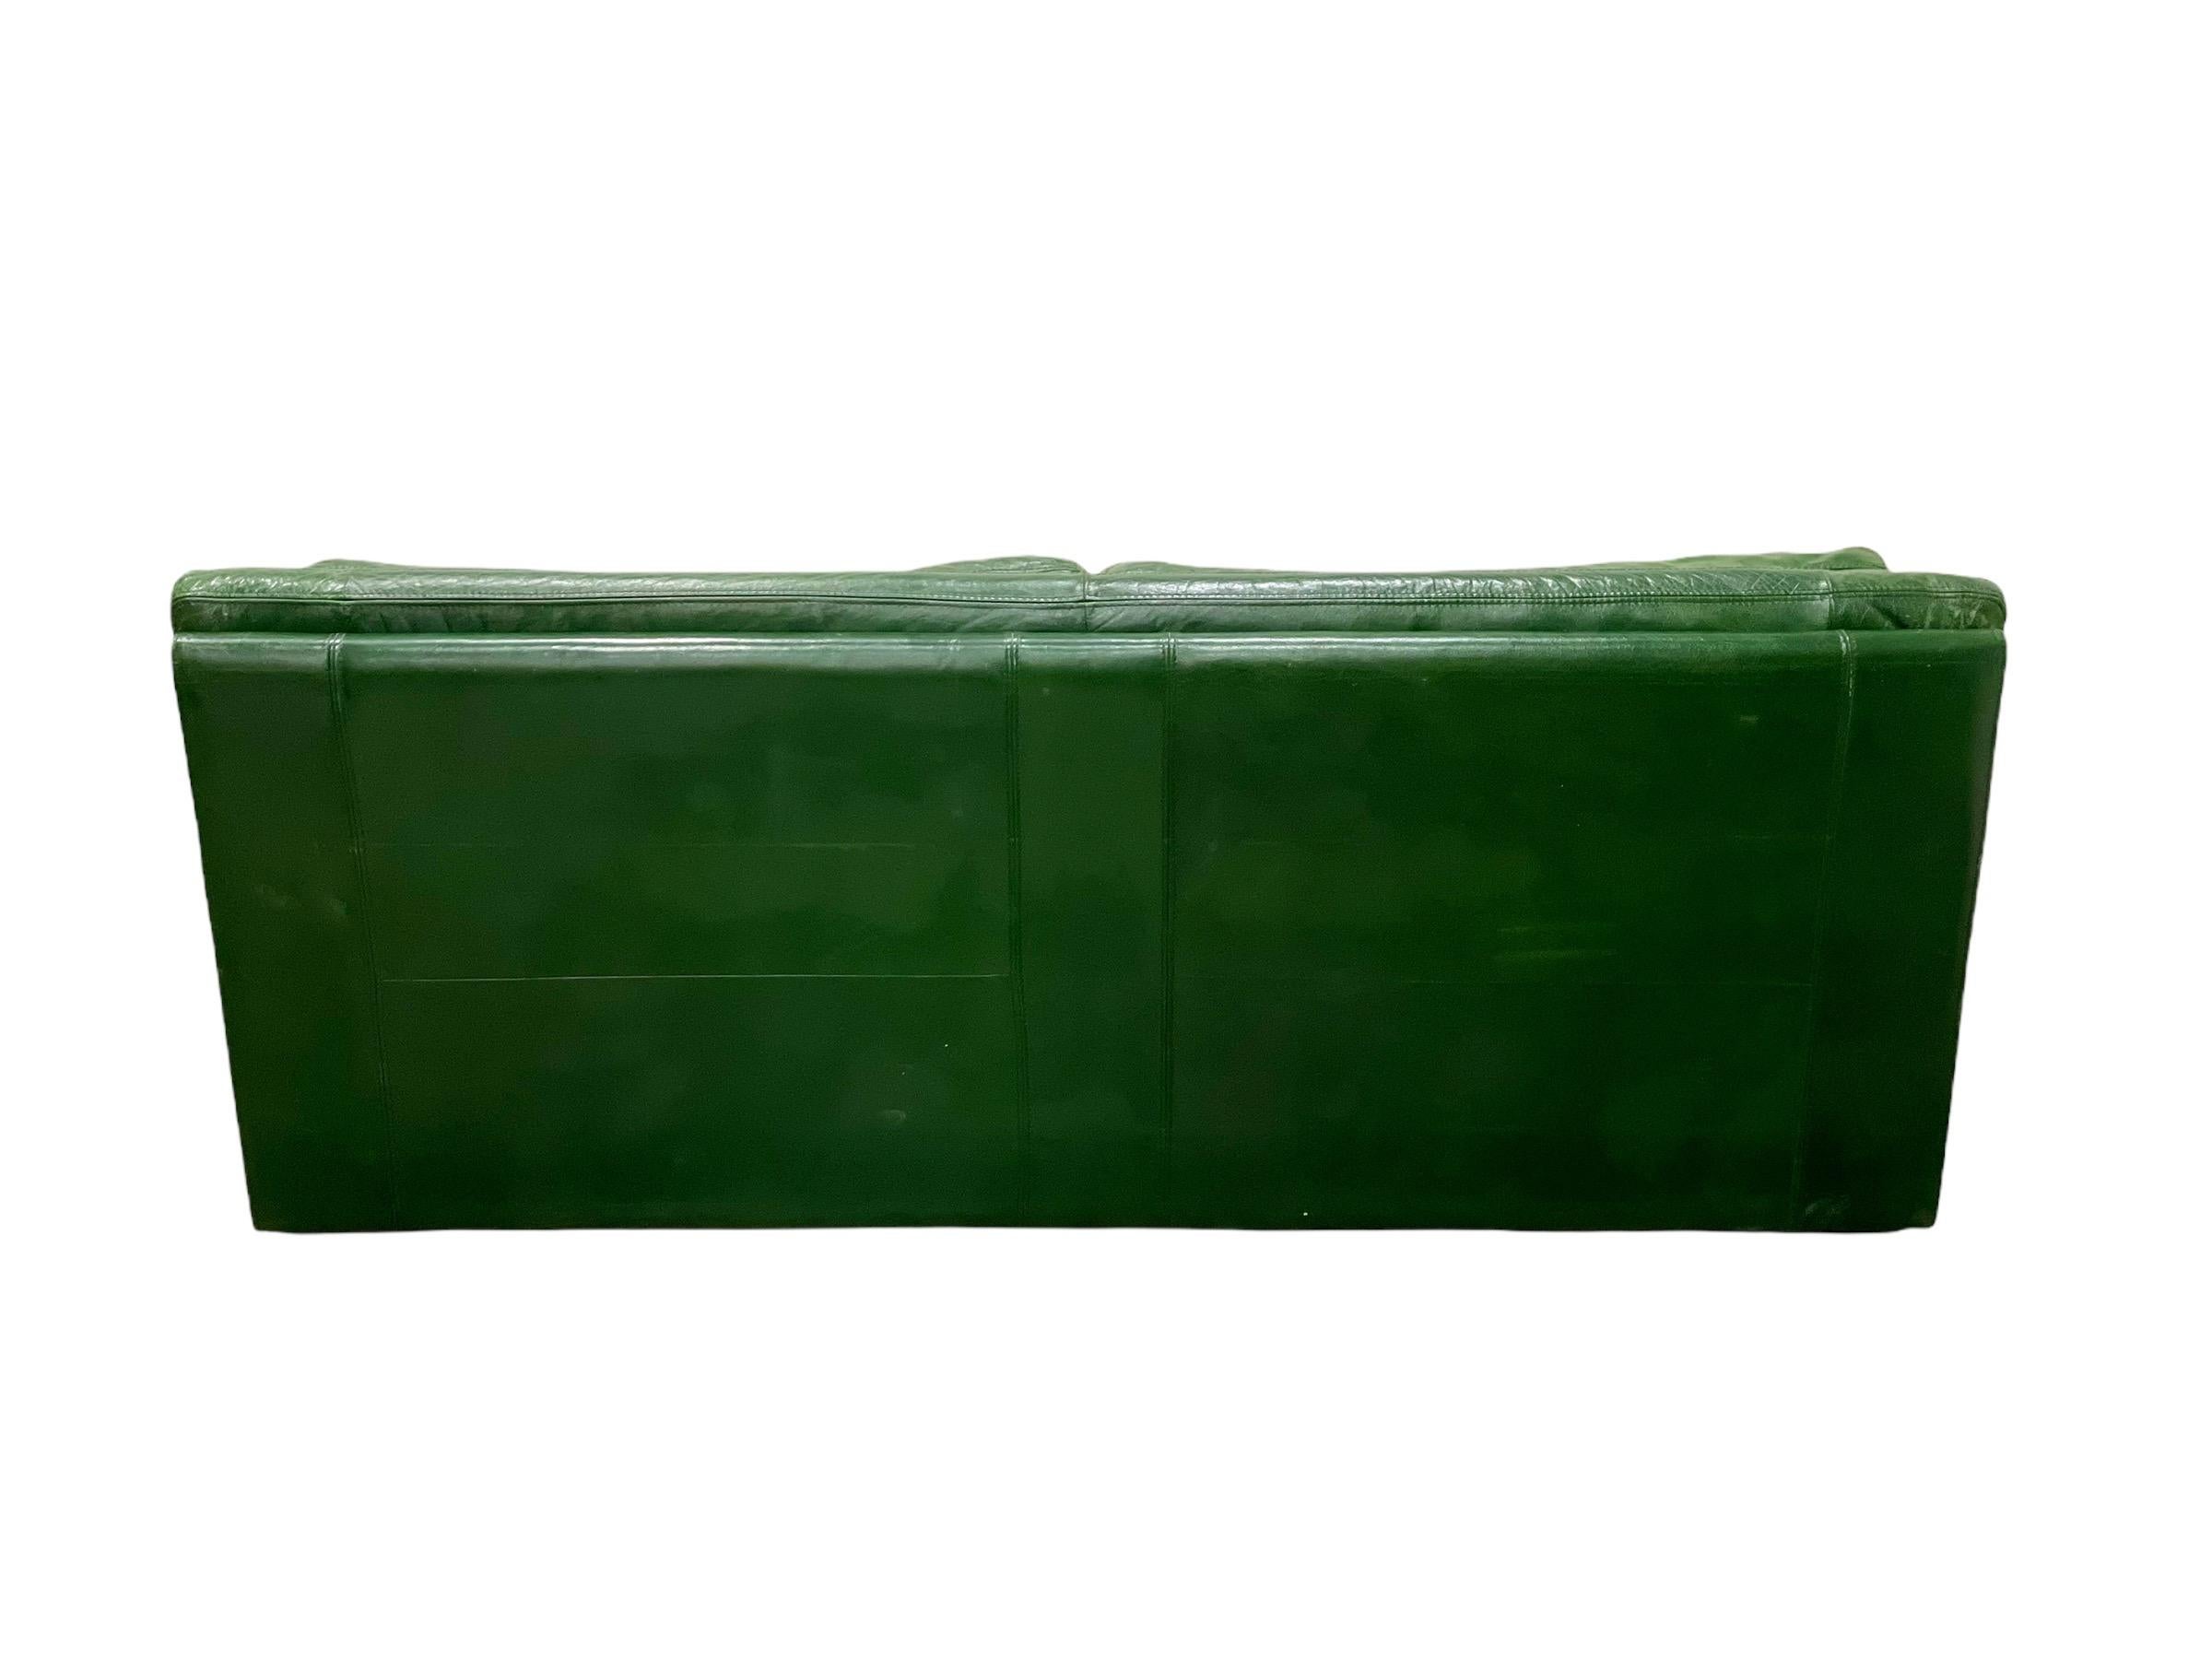 Late 20th Century Roche Bobois Vintage Post Modern Green Leather Sofa and Loveseat, circa 1987